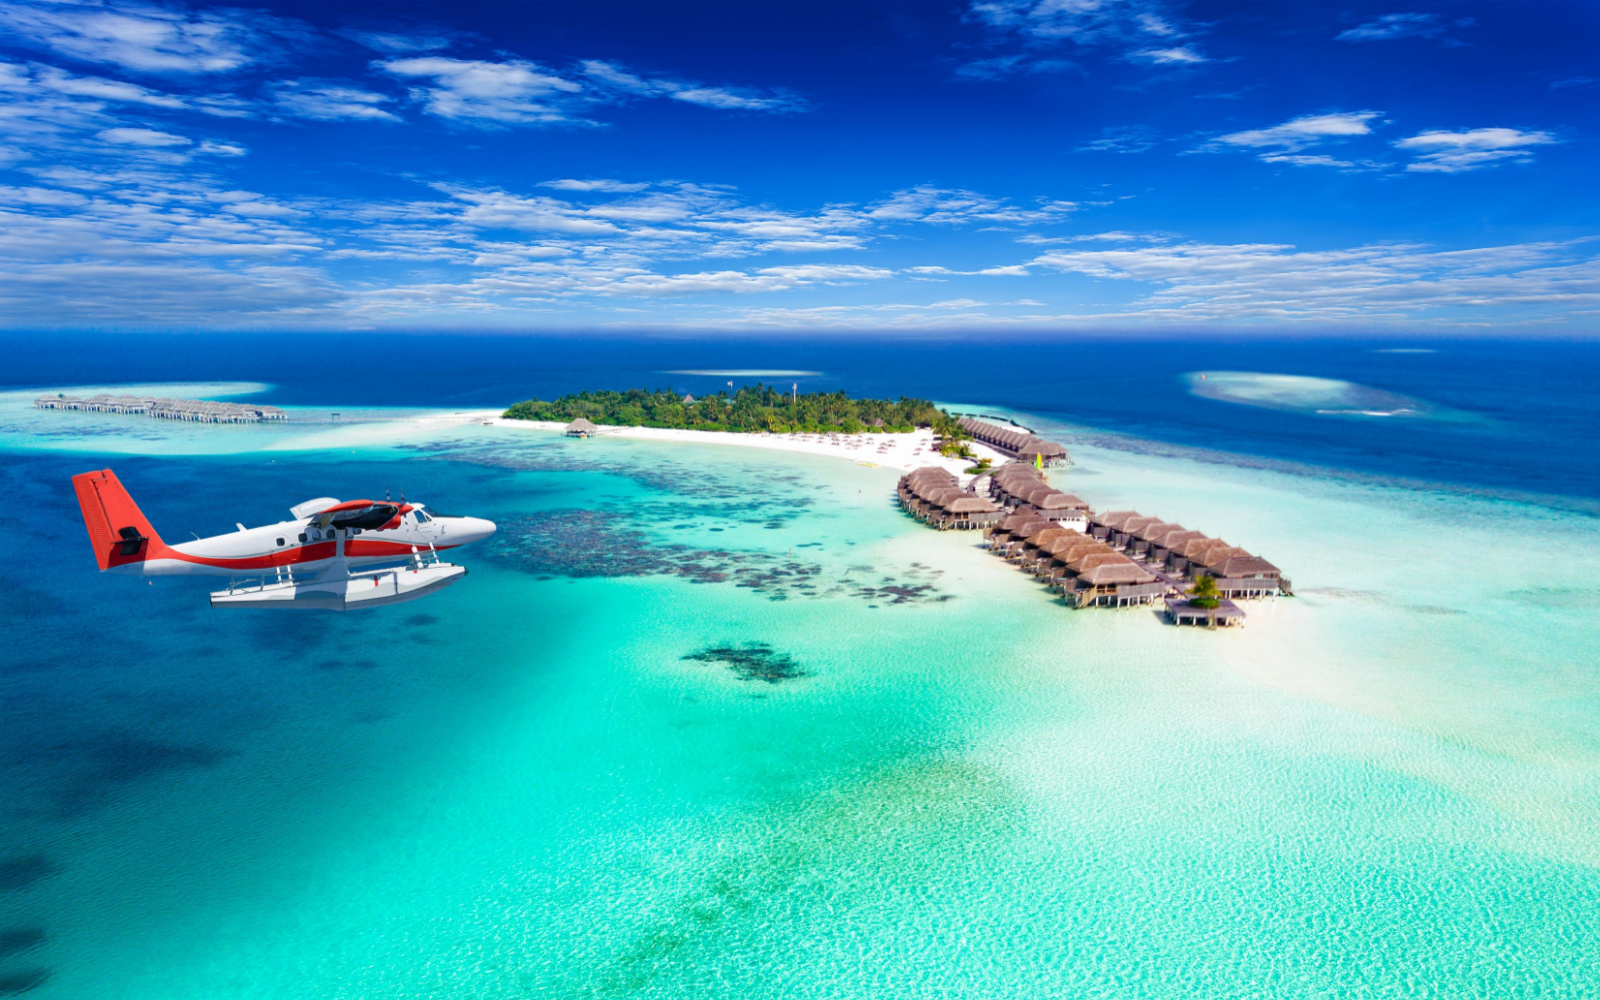 The 15 Best Resorts in the Maldives in 2023